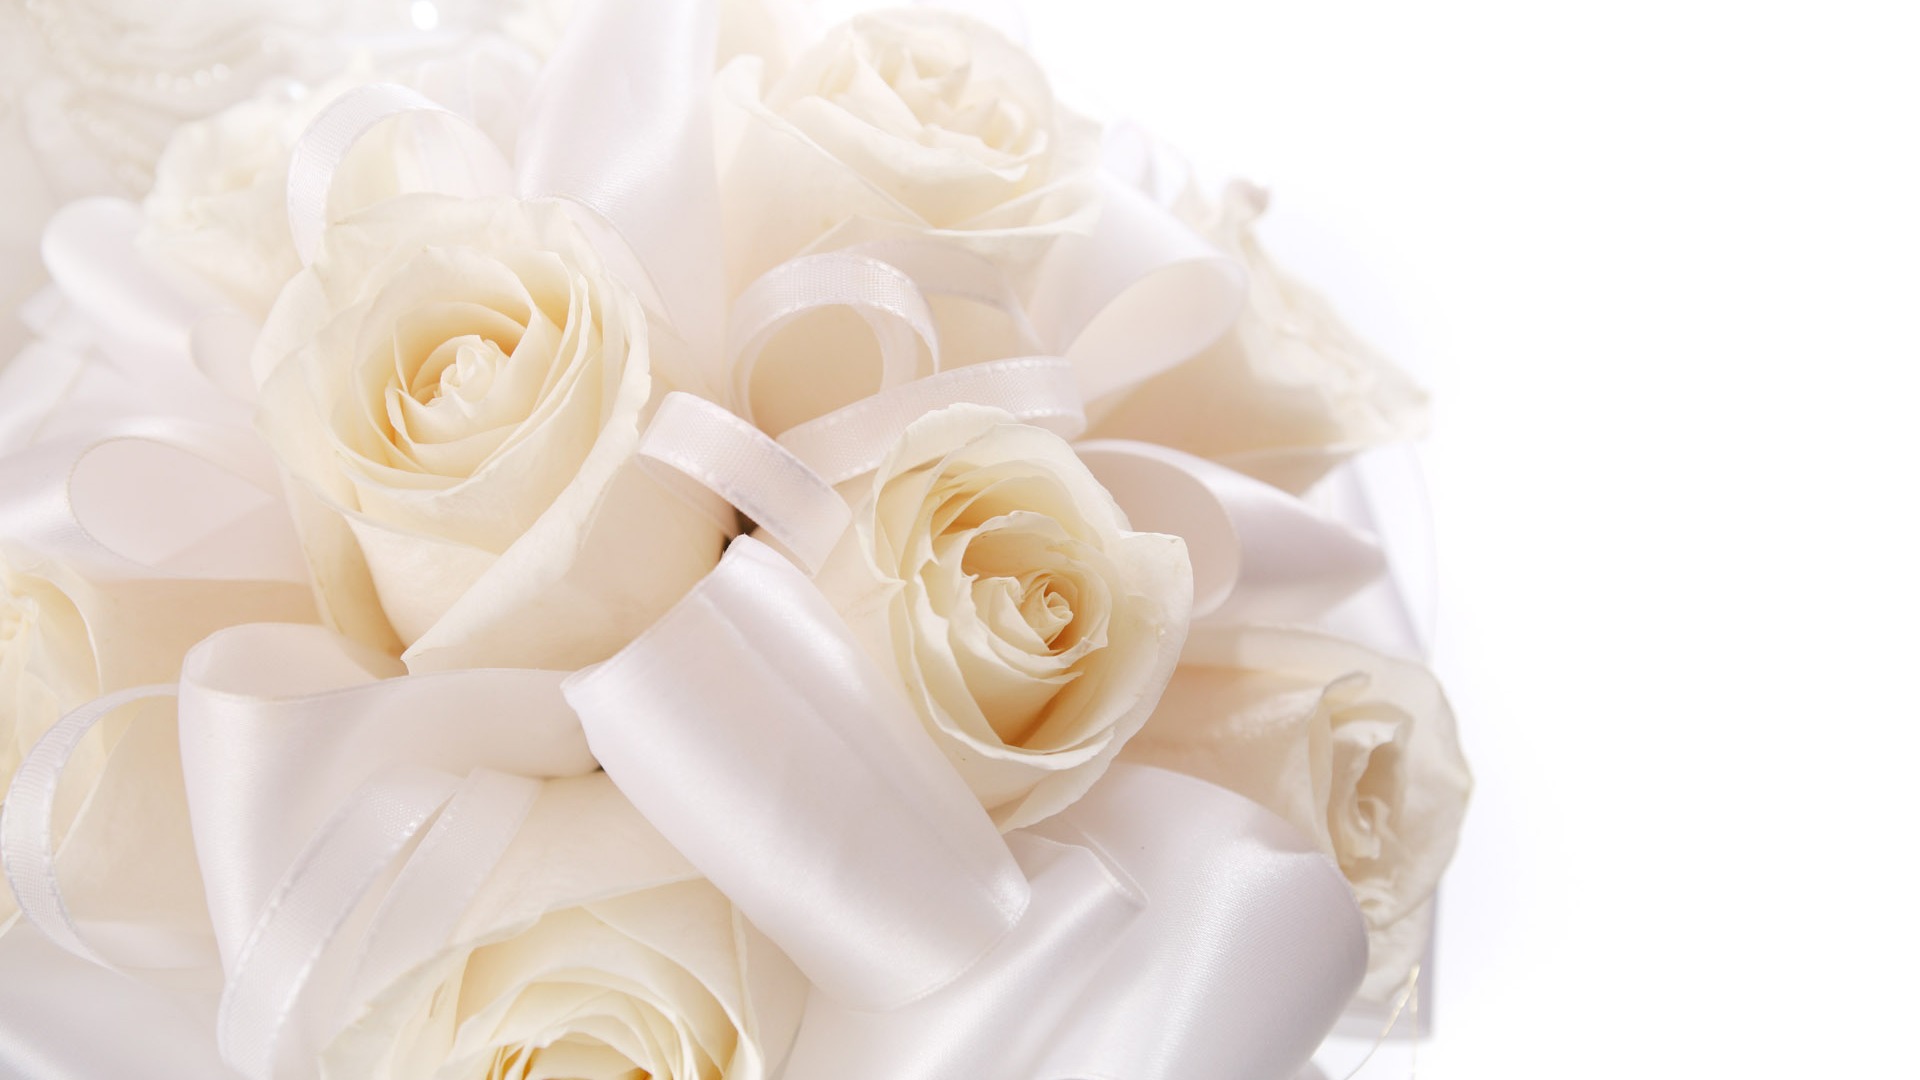 Weddings and Flowers wallpaper (1) #4 - 1920x1080